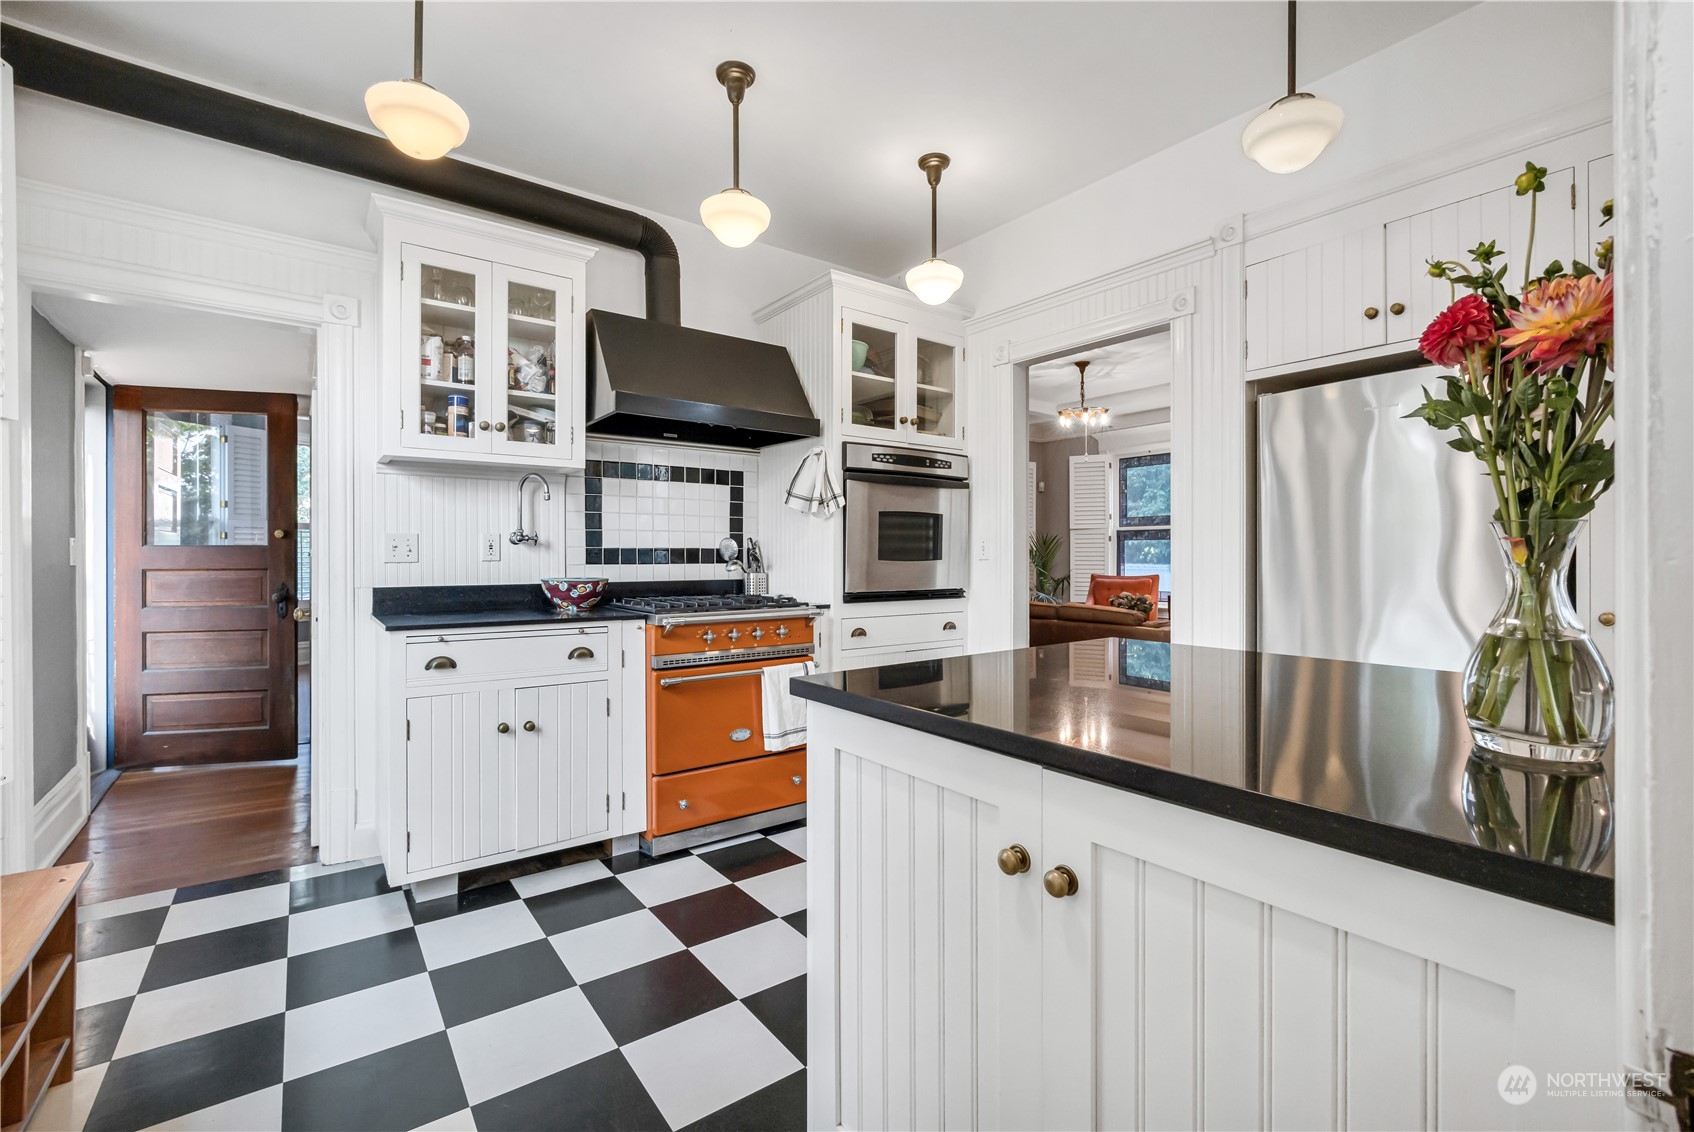 a kitchen with stainless steel appliances granite countertop a sink a stove a refrigerator and cabinets